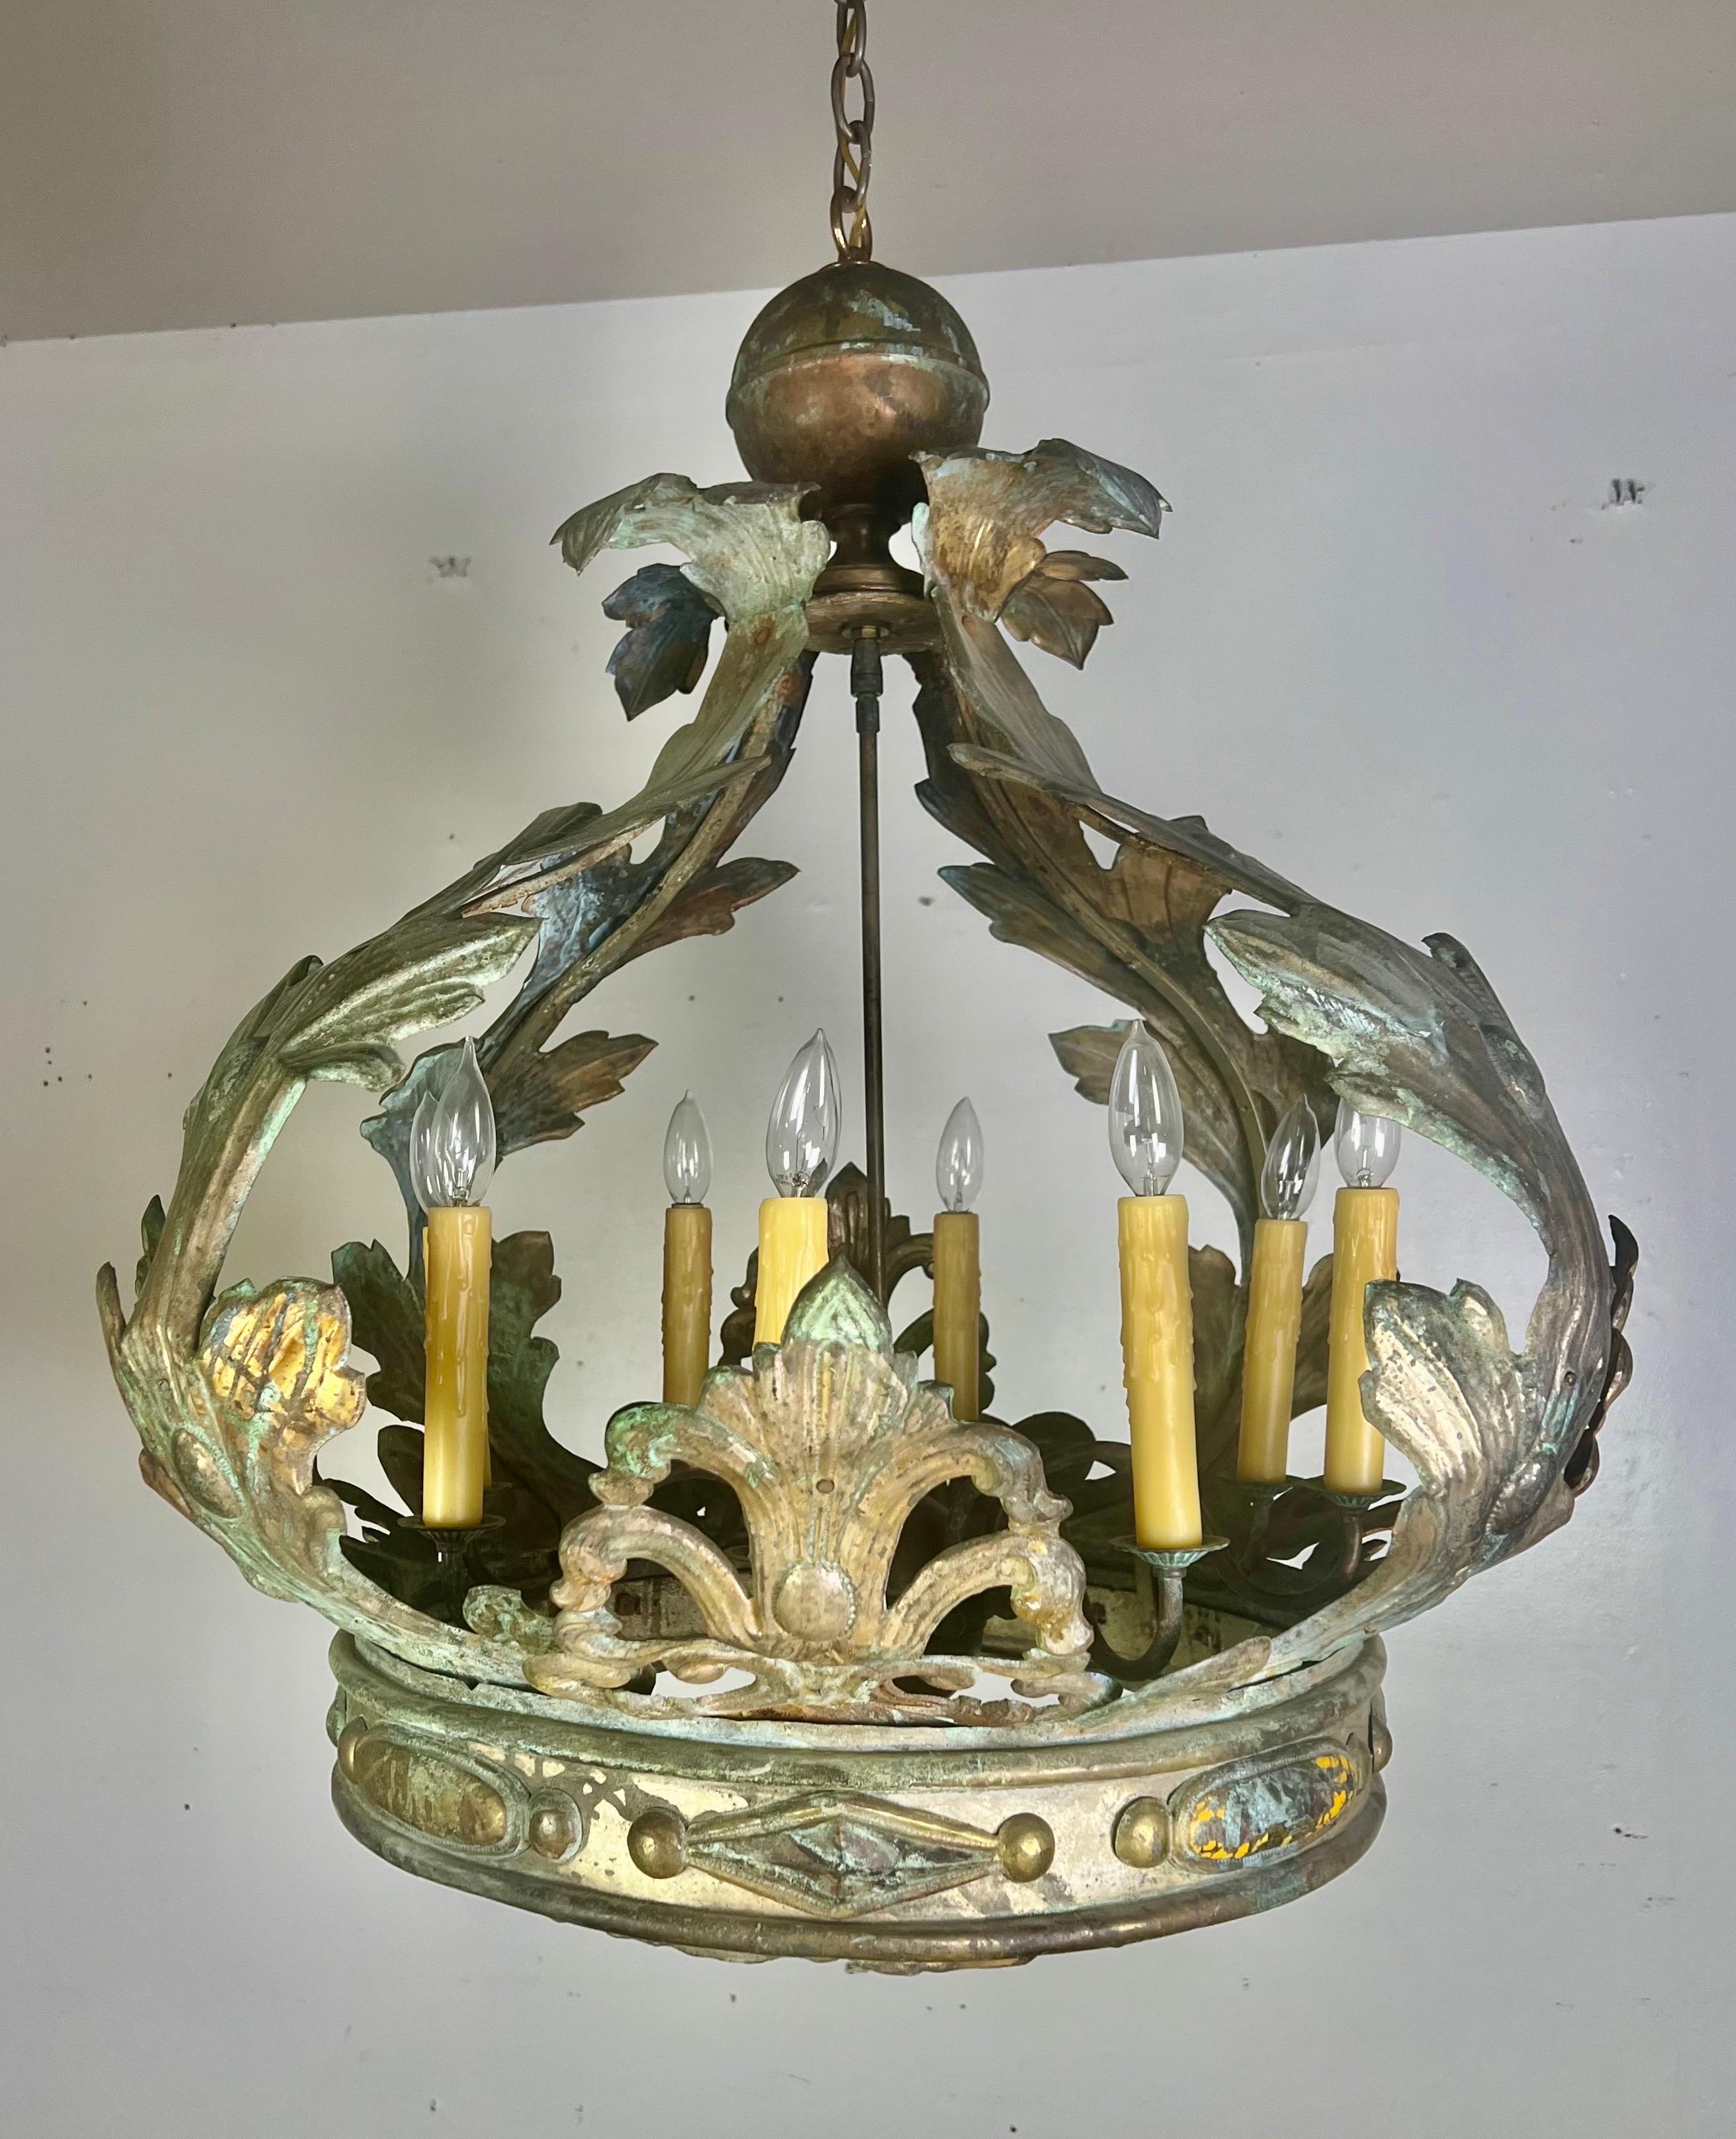 An 19th-century toll chandelier with acanthus leaves and a diamond-shaped design at the base, showcasing an incredible patina.  The crown was retrofitted into an 8-light chandelier with wiring and a canopy.  It is remarkable and ready-to-install. 